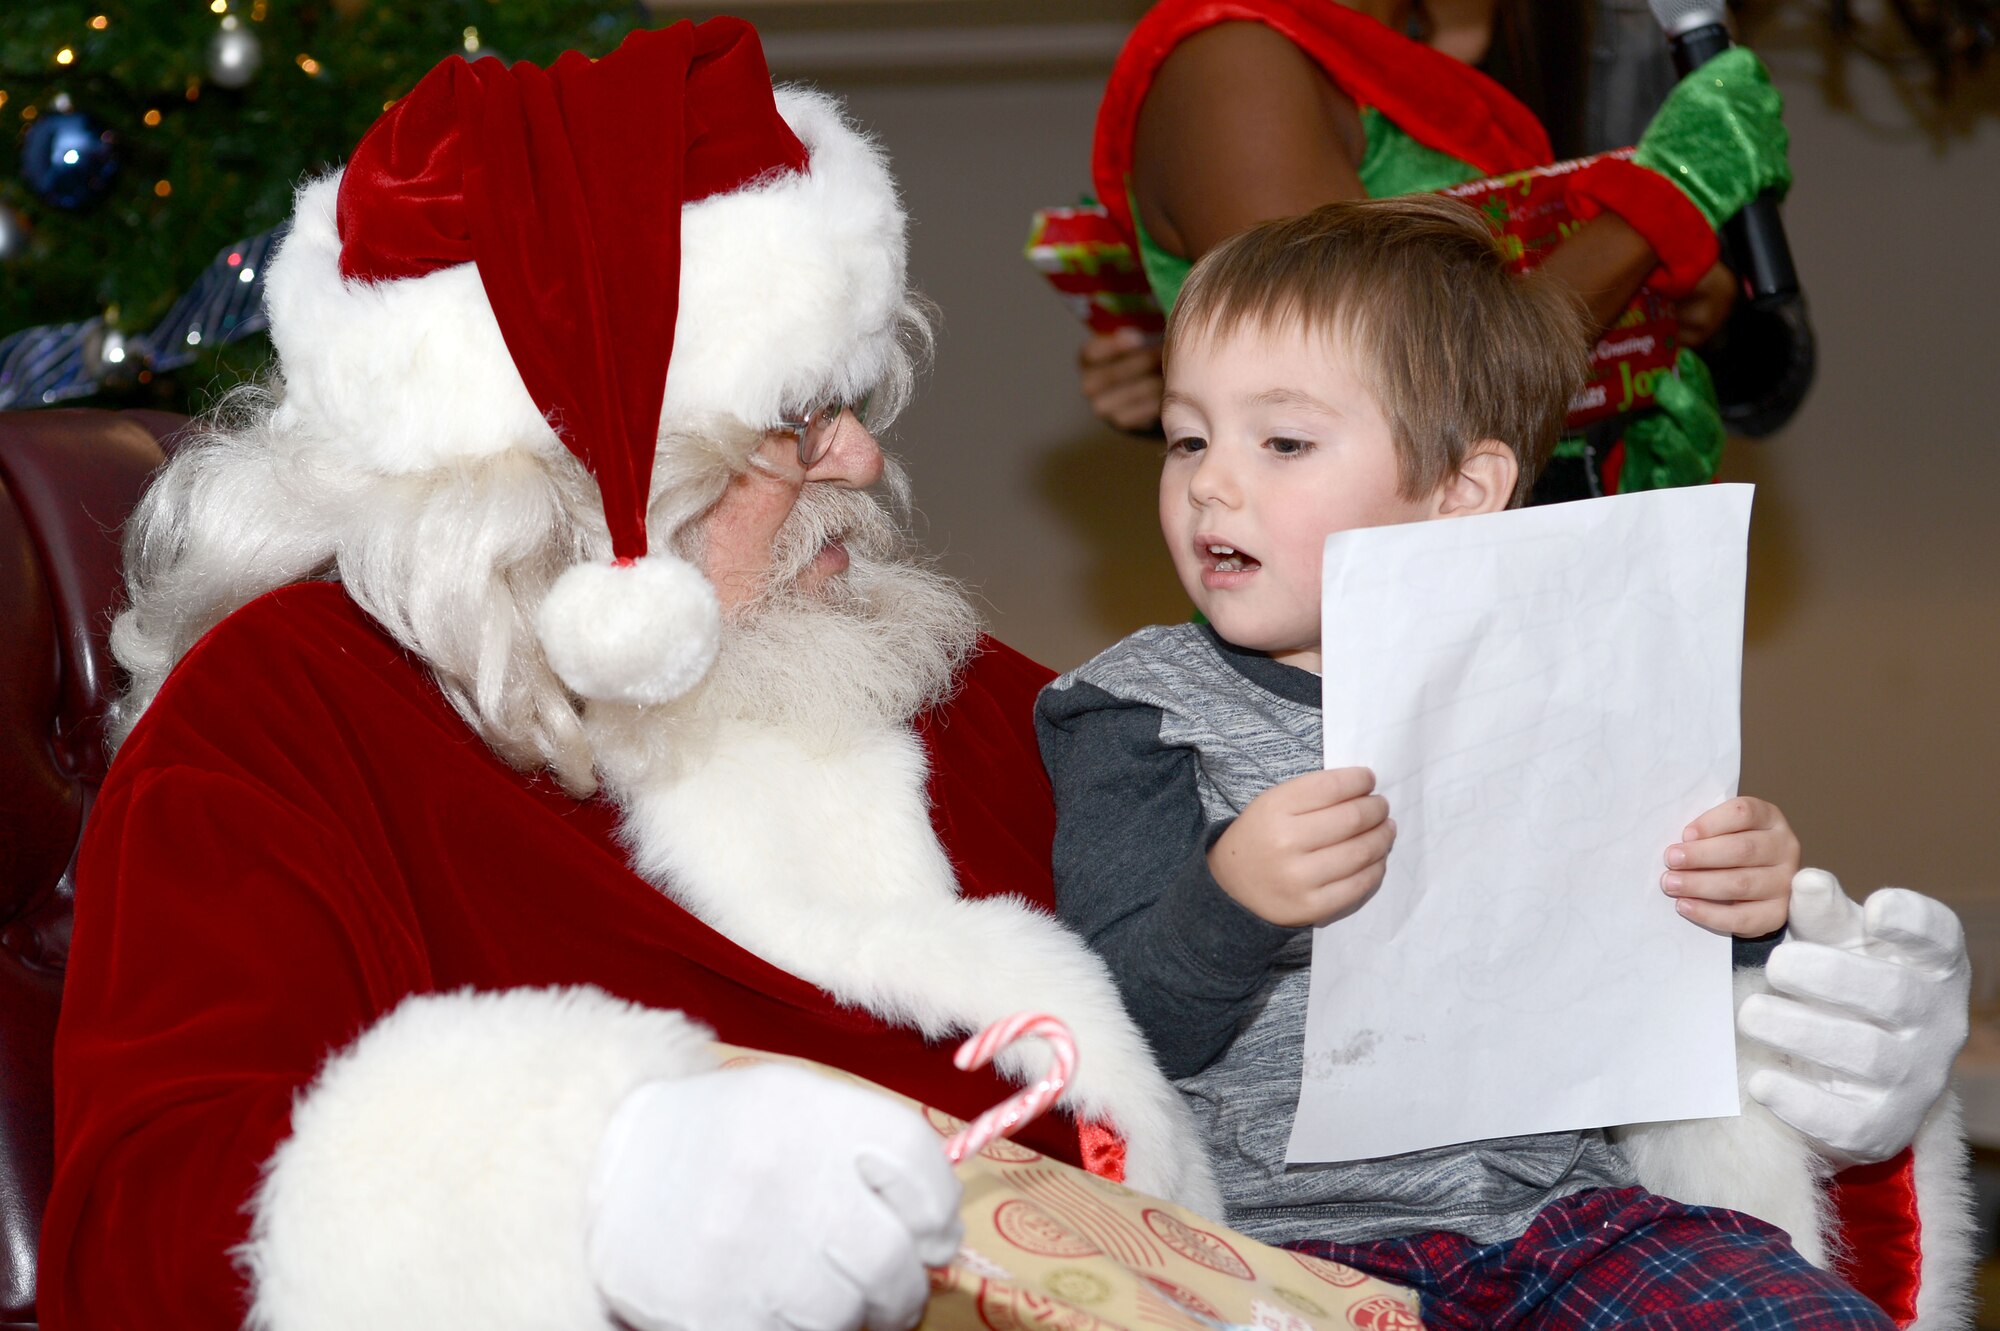 Ryder Martin, child of U.S. Air Force Special Agent Josh Martin, Office of Special Investigations Detachment 212 special agent, explains a picture he colored for Santa Claus before receiving a gift at the Carolina Skies Club and Conference Center at Shaw Air Force Base, S.C., Dec. 12, 2015. Santa visited with Team Shaw children as part of the 20th Force Support Squadron’s “Breakfast with Santa in your Pajamas” event, for which children and their families were invited to Carolina Skies to eat breakfast and watch holiday movies in their pajamas before meeting Santa Claus. (U.S. Air Force photo by Senior Airman Zade Vadnais)